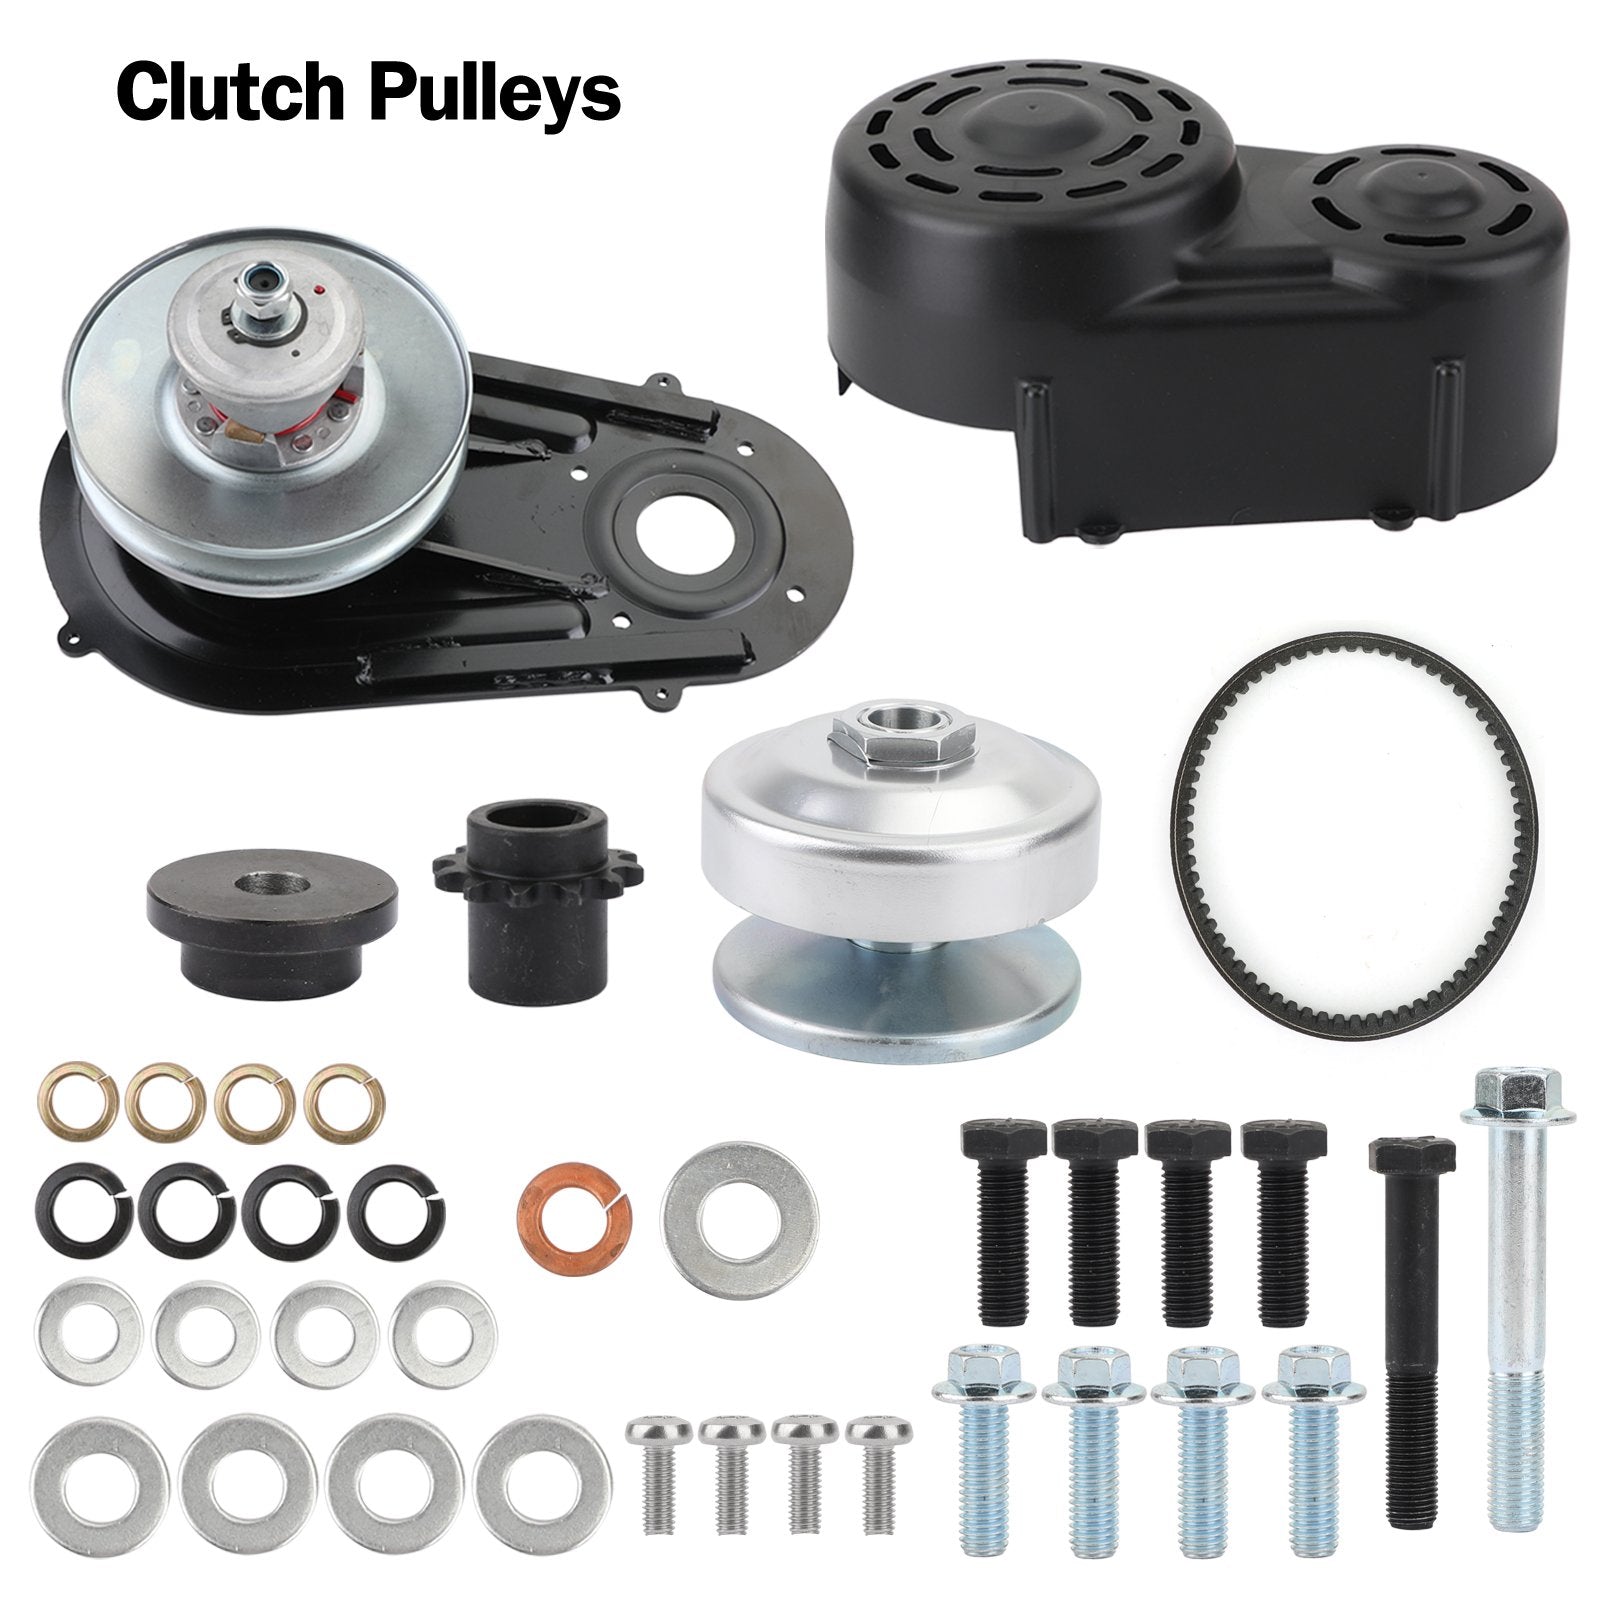 Clutch Pulleys Belt & Cover 40 Series Torque Converter Kit with Backplate